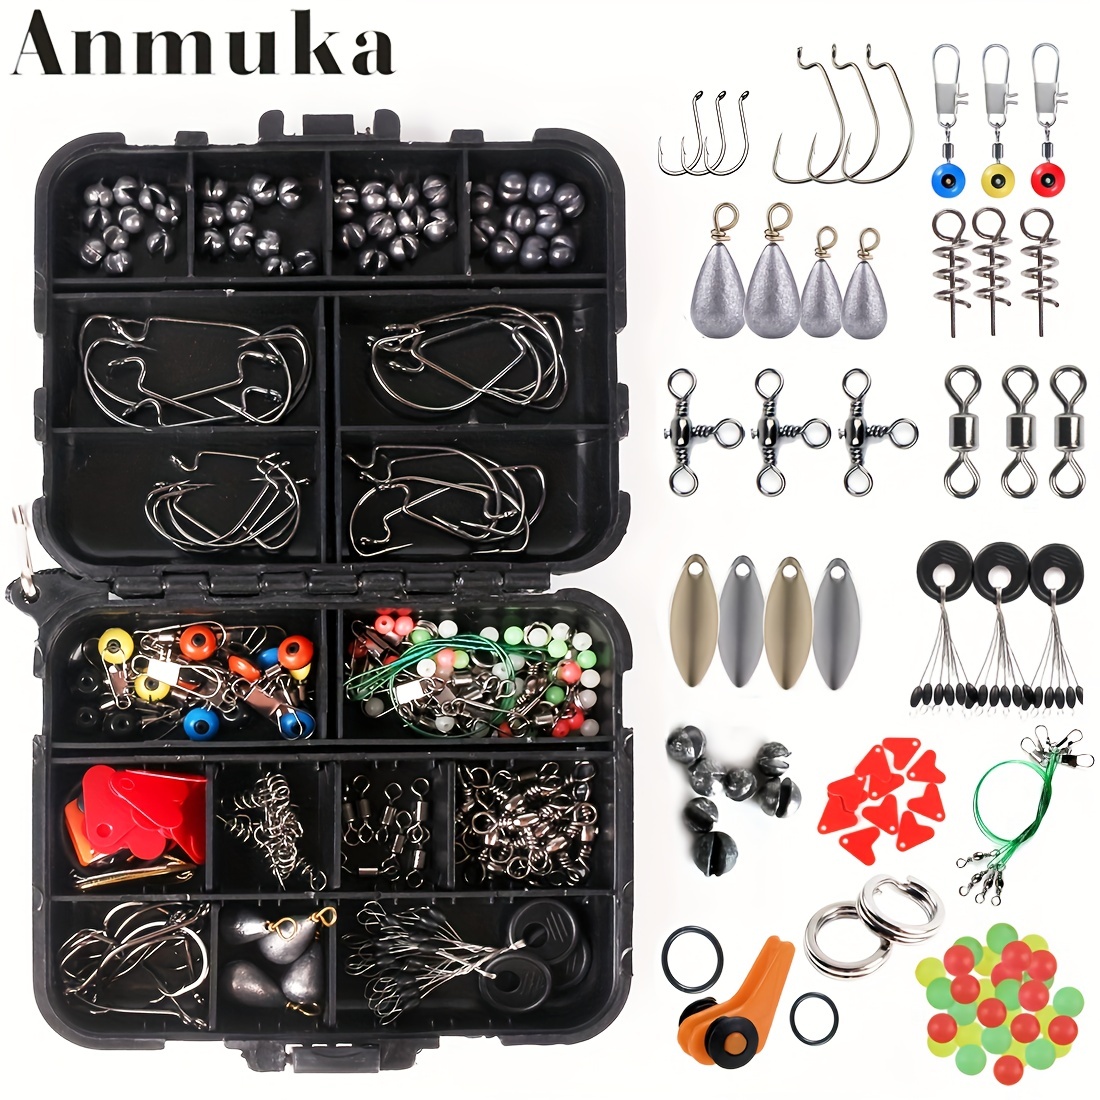 165pcs/lot Complete Fishing Kit With Tackle Box - Includes Crank Hooks,  Snaps, Rolling Swivels, And Connectors For Easy Fishing